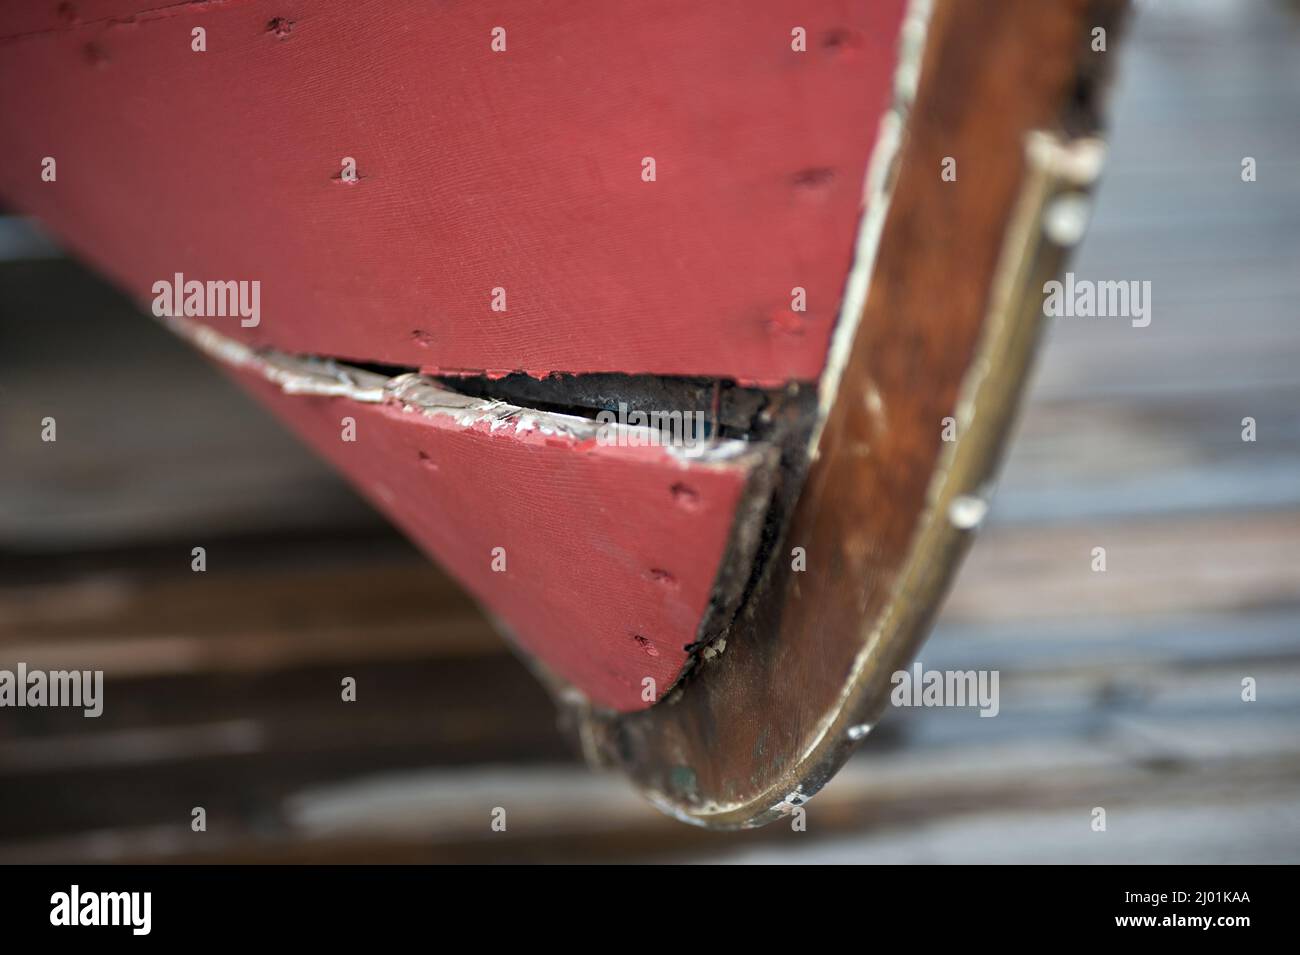 Red boat with its cracked bow in a dry dock. Trouble ahead. Disaster ahead. Warning sign. Problems ahead. Stock Photo